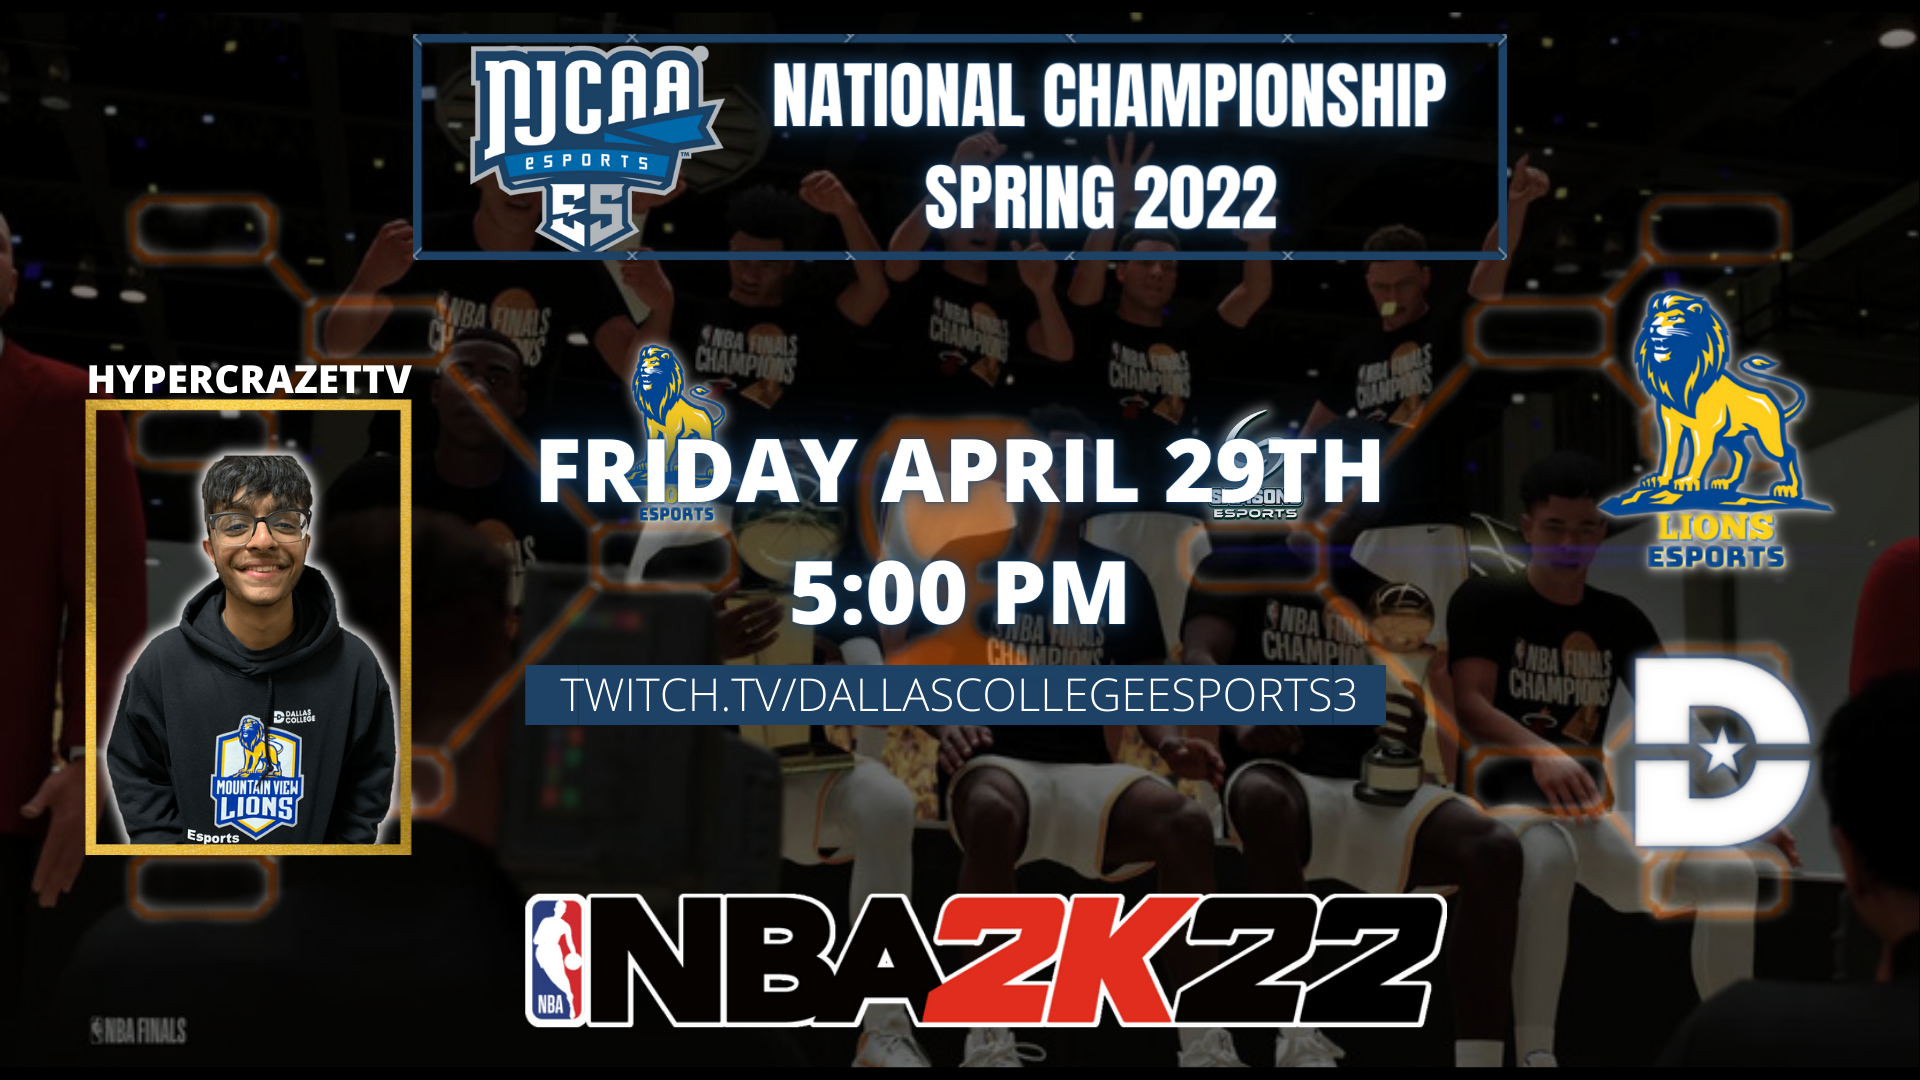 The Mountain View Lions Are Headed To The NJCAAE NBA 2K Spring Finals!